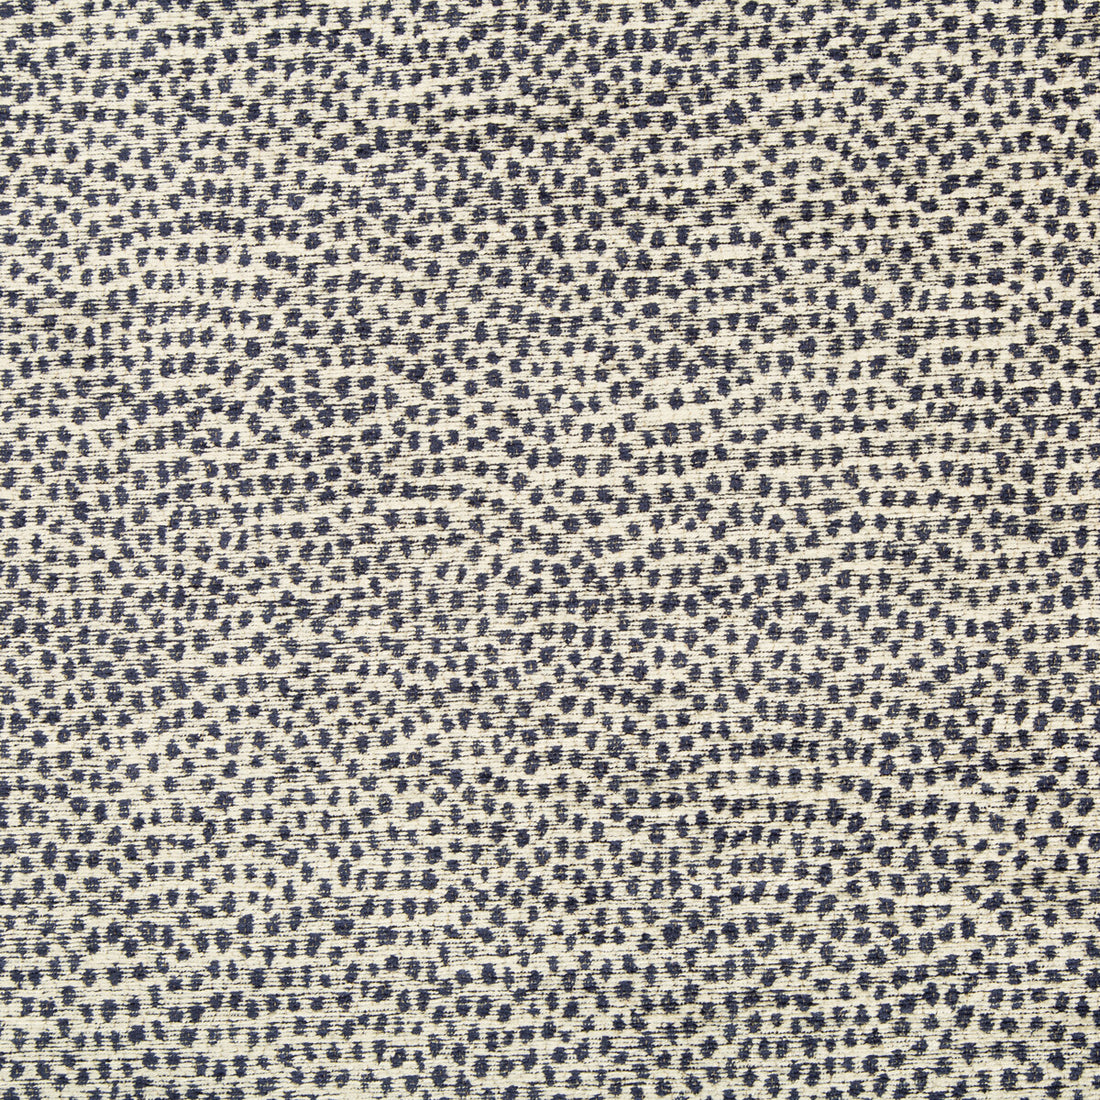 Kravet Design fabric in 34971-50 color - pattern 34971.50.0 - by Kravet Design in the Performance Crypton Home collection